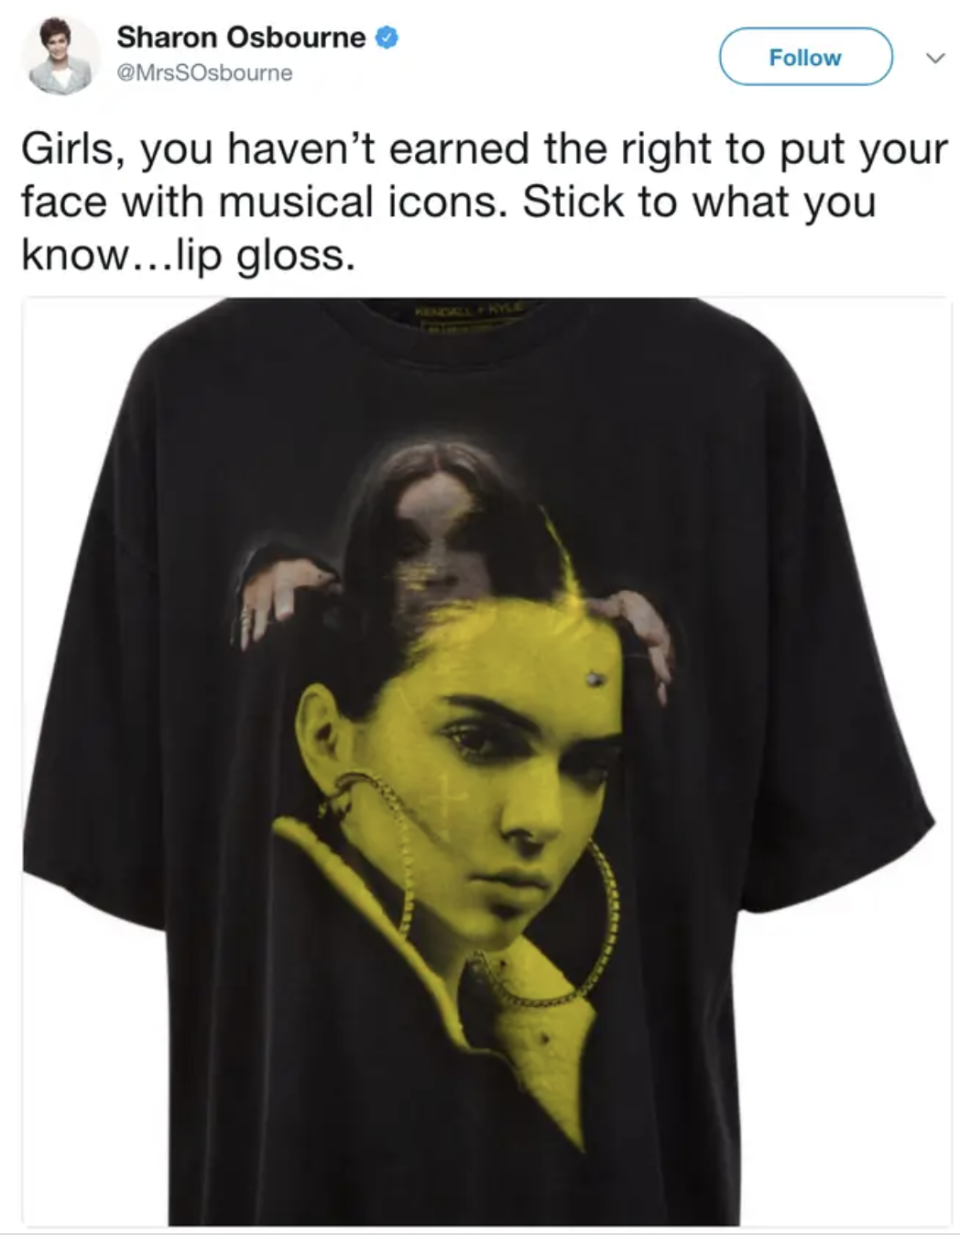 A tweet from Sharon Osborne with a photo of a tshirt featuring Kendall Jenner's face superimposed over Ozzy Osbourne's